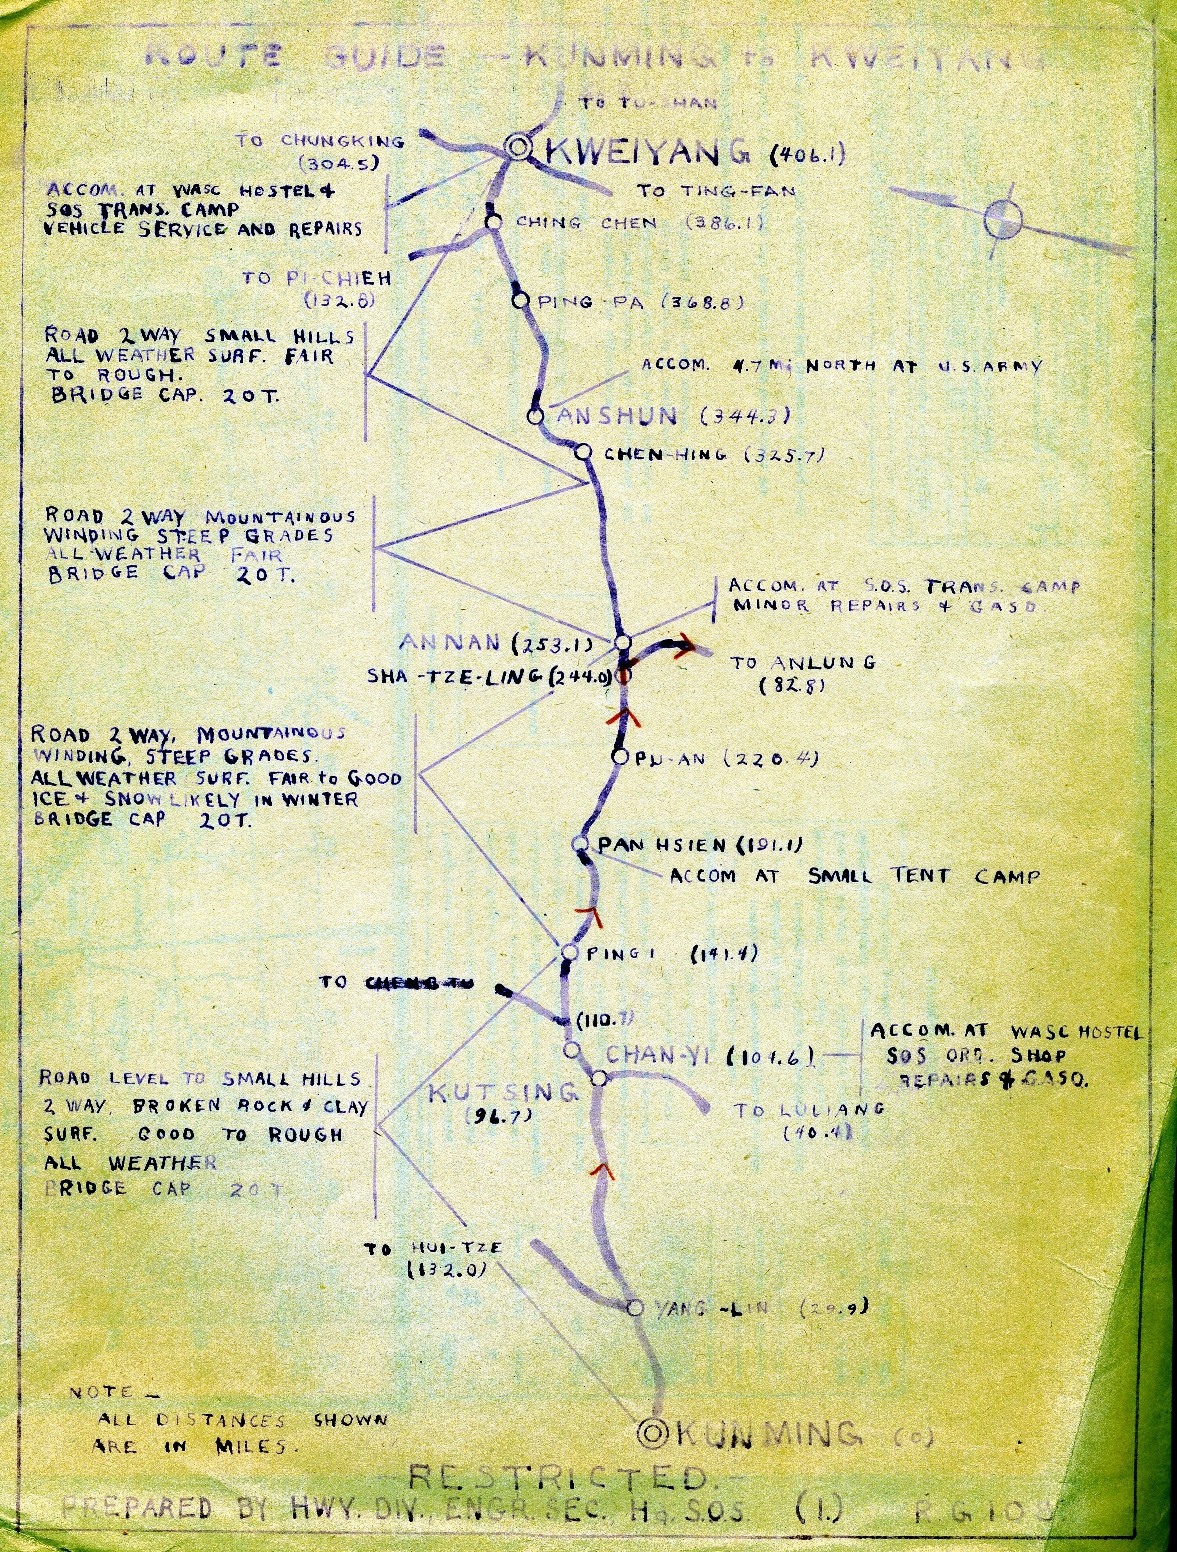  Route Guide - Kunming to Kweiyang - Map Page 